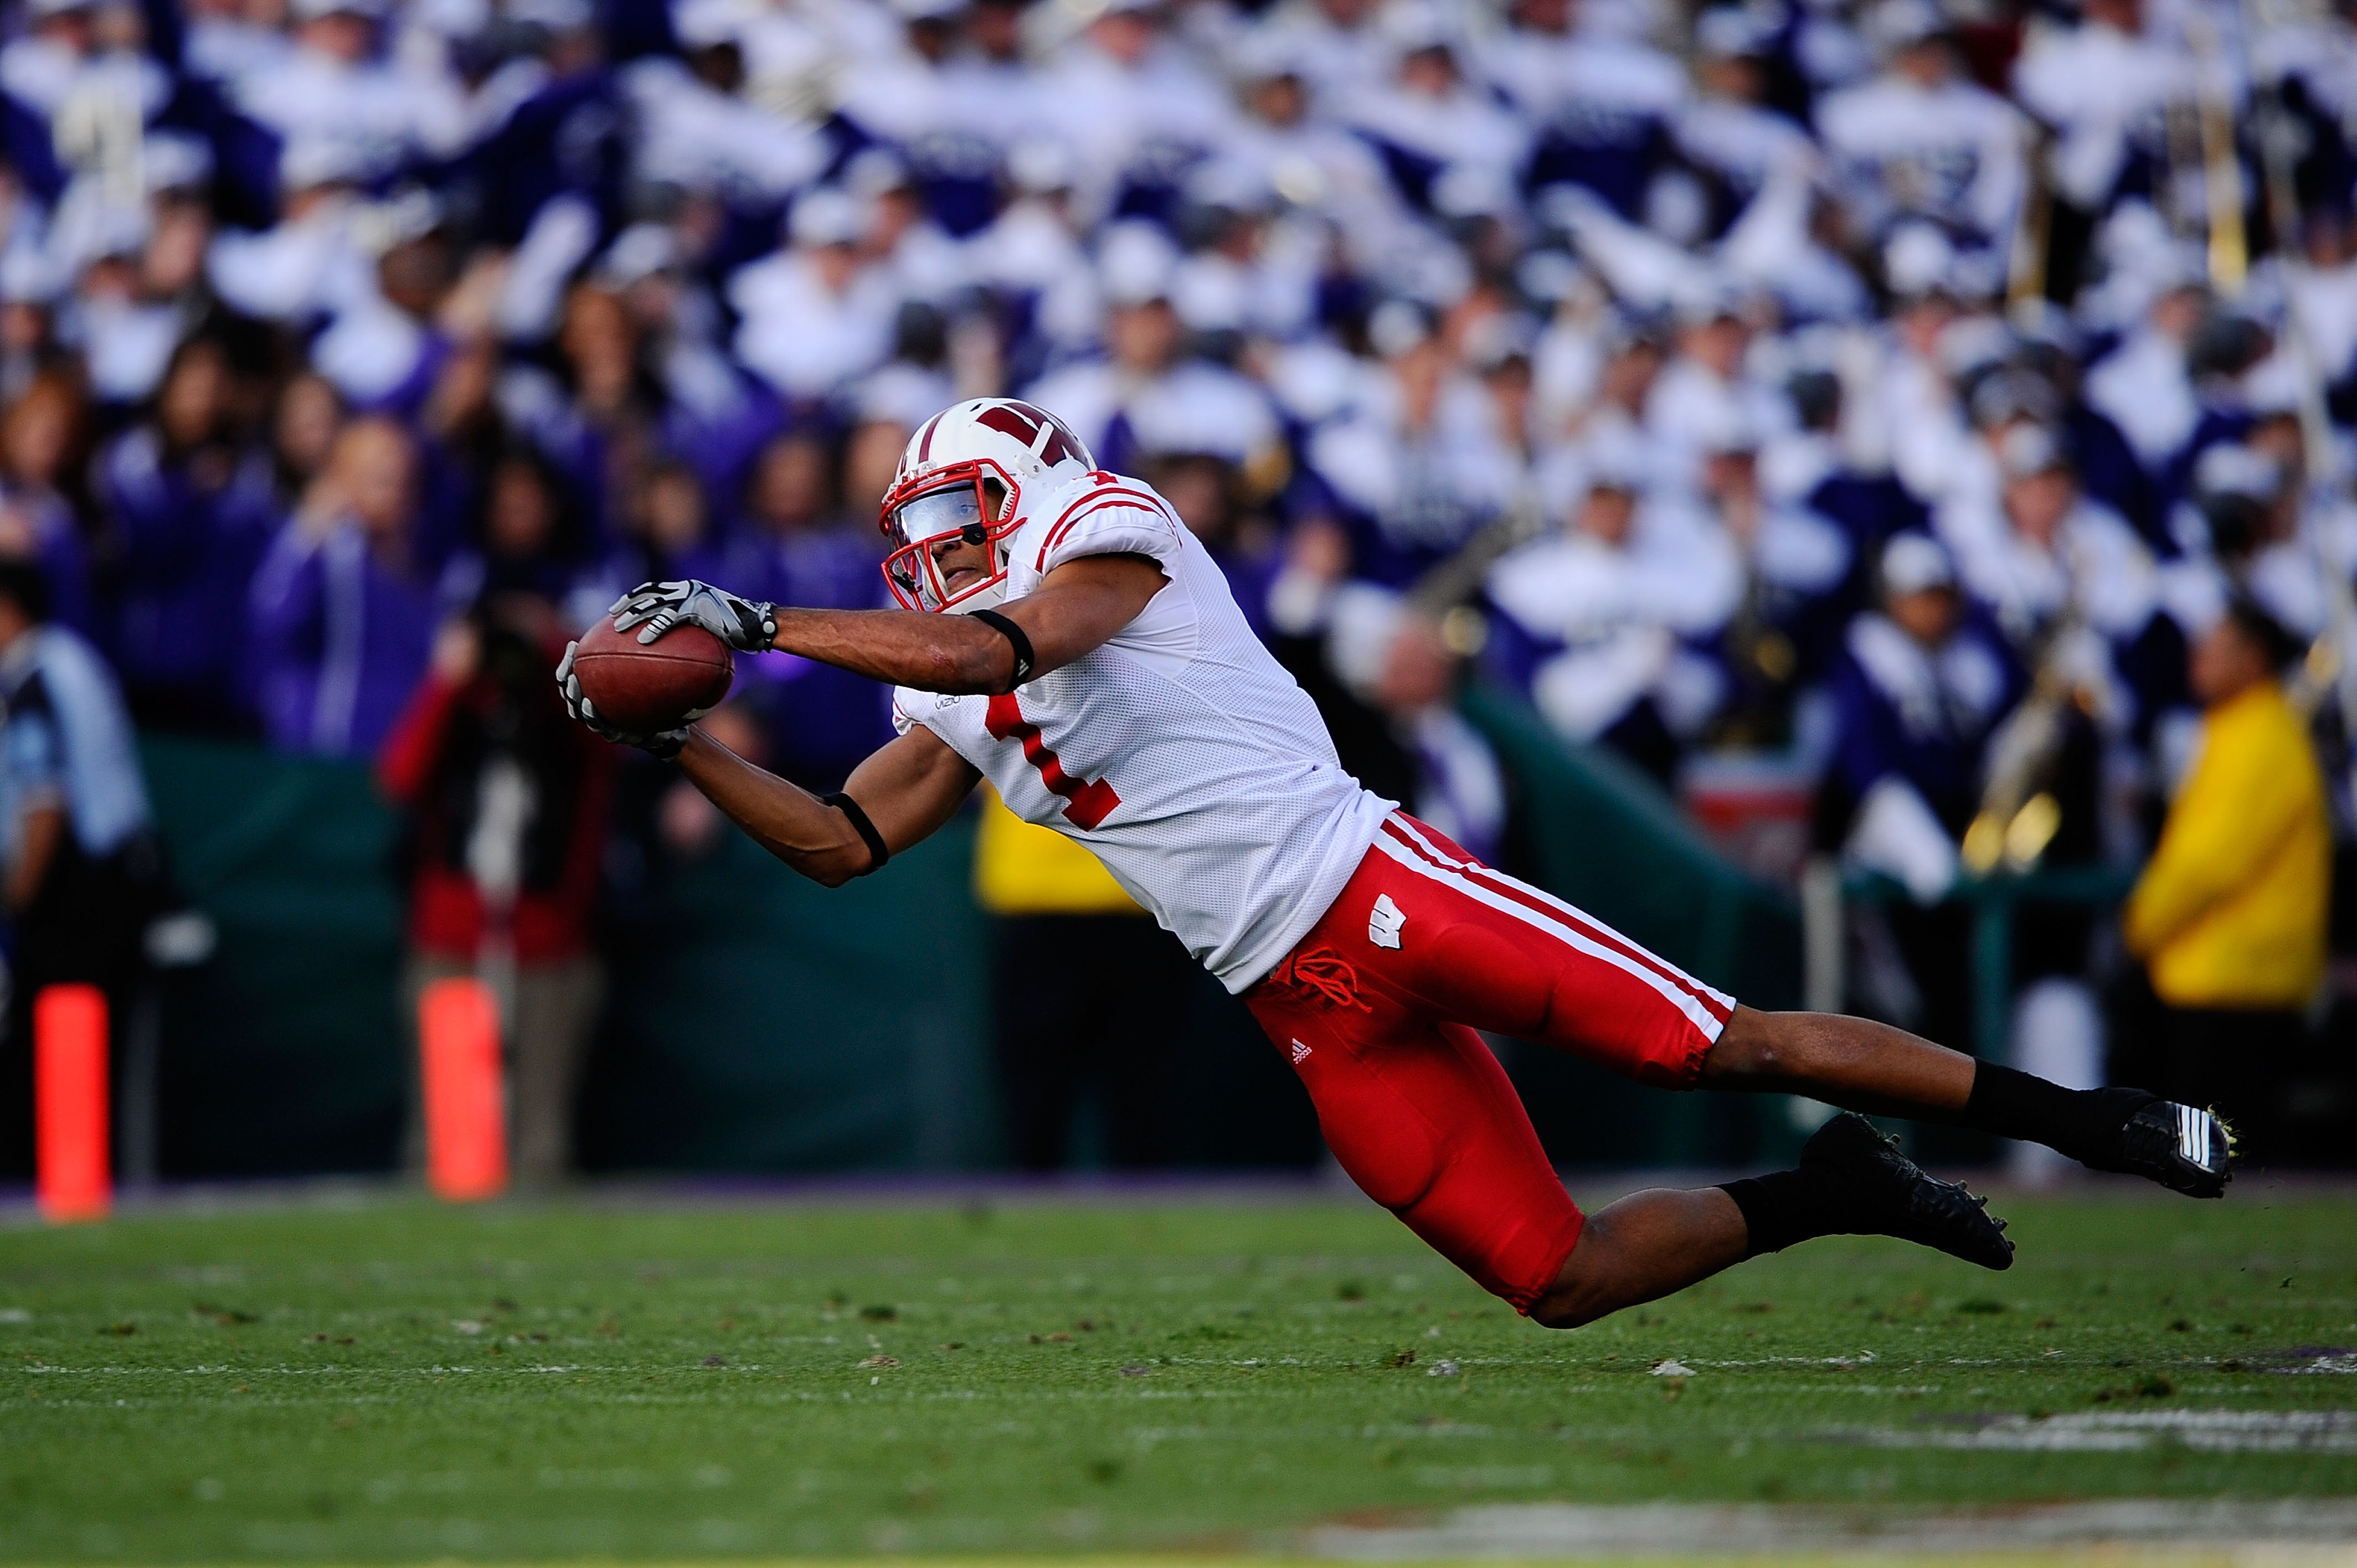 PASADENA, CA - JANUARY 01:  Wide receiver Nick Toon #1 of the Wisconsin Badgers makes a catch against the TCU Horned Frogs during the 97th Rose Bowl game on January 1, 2011 in Pasadena, California.  (Photo by Kevork Djansezian/Getty Images)